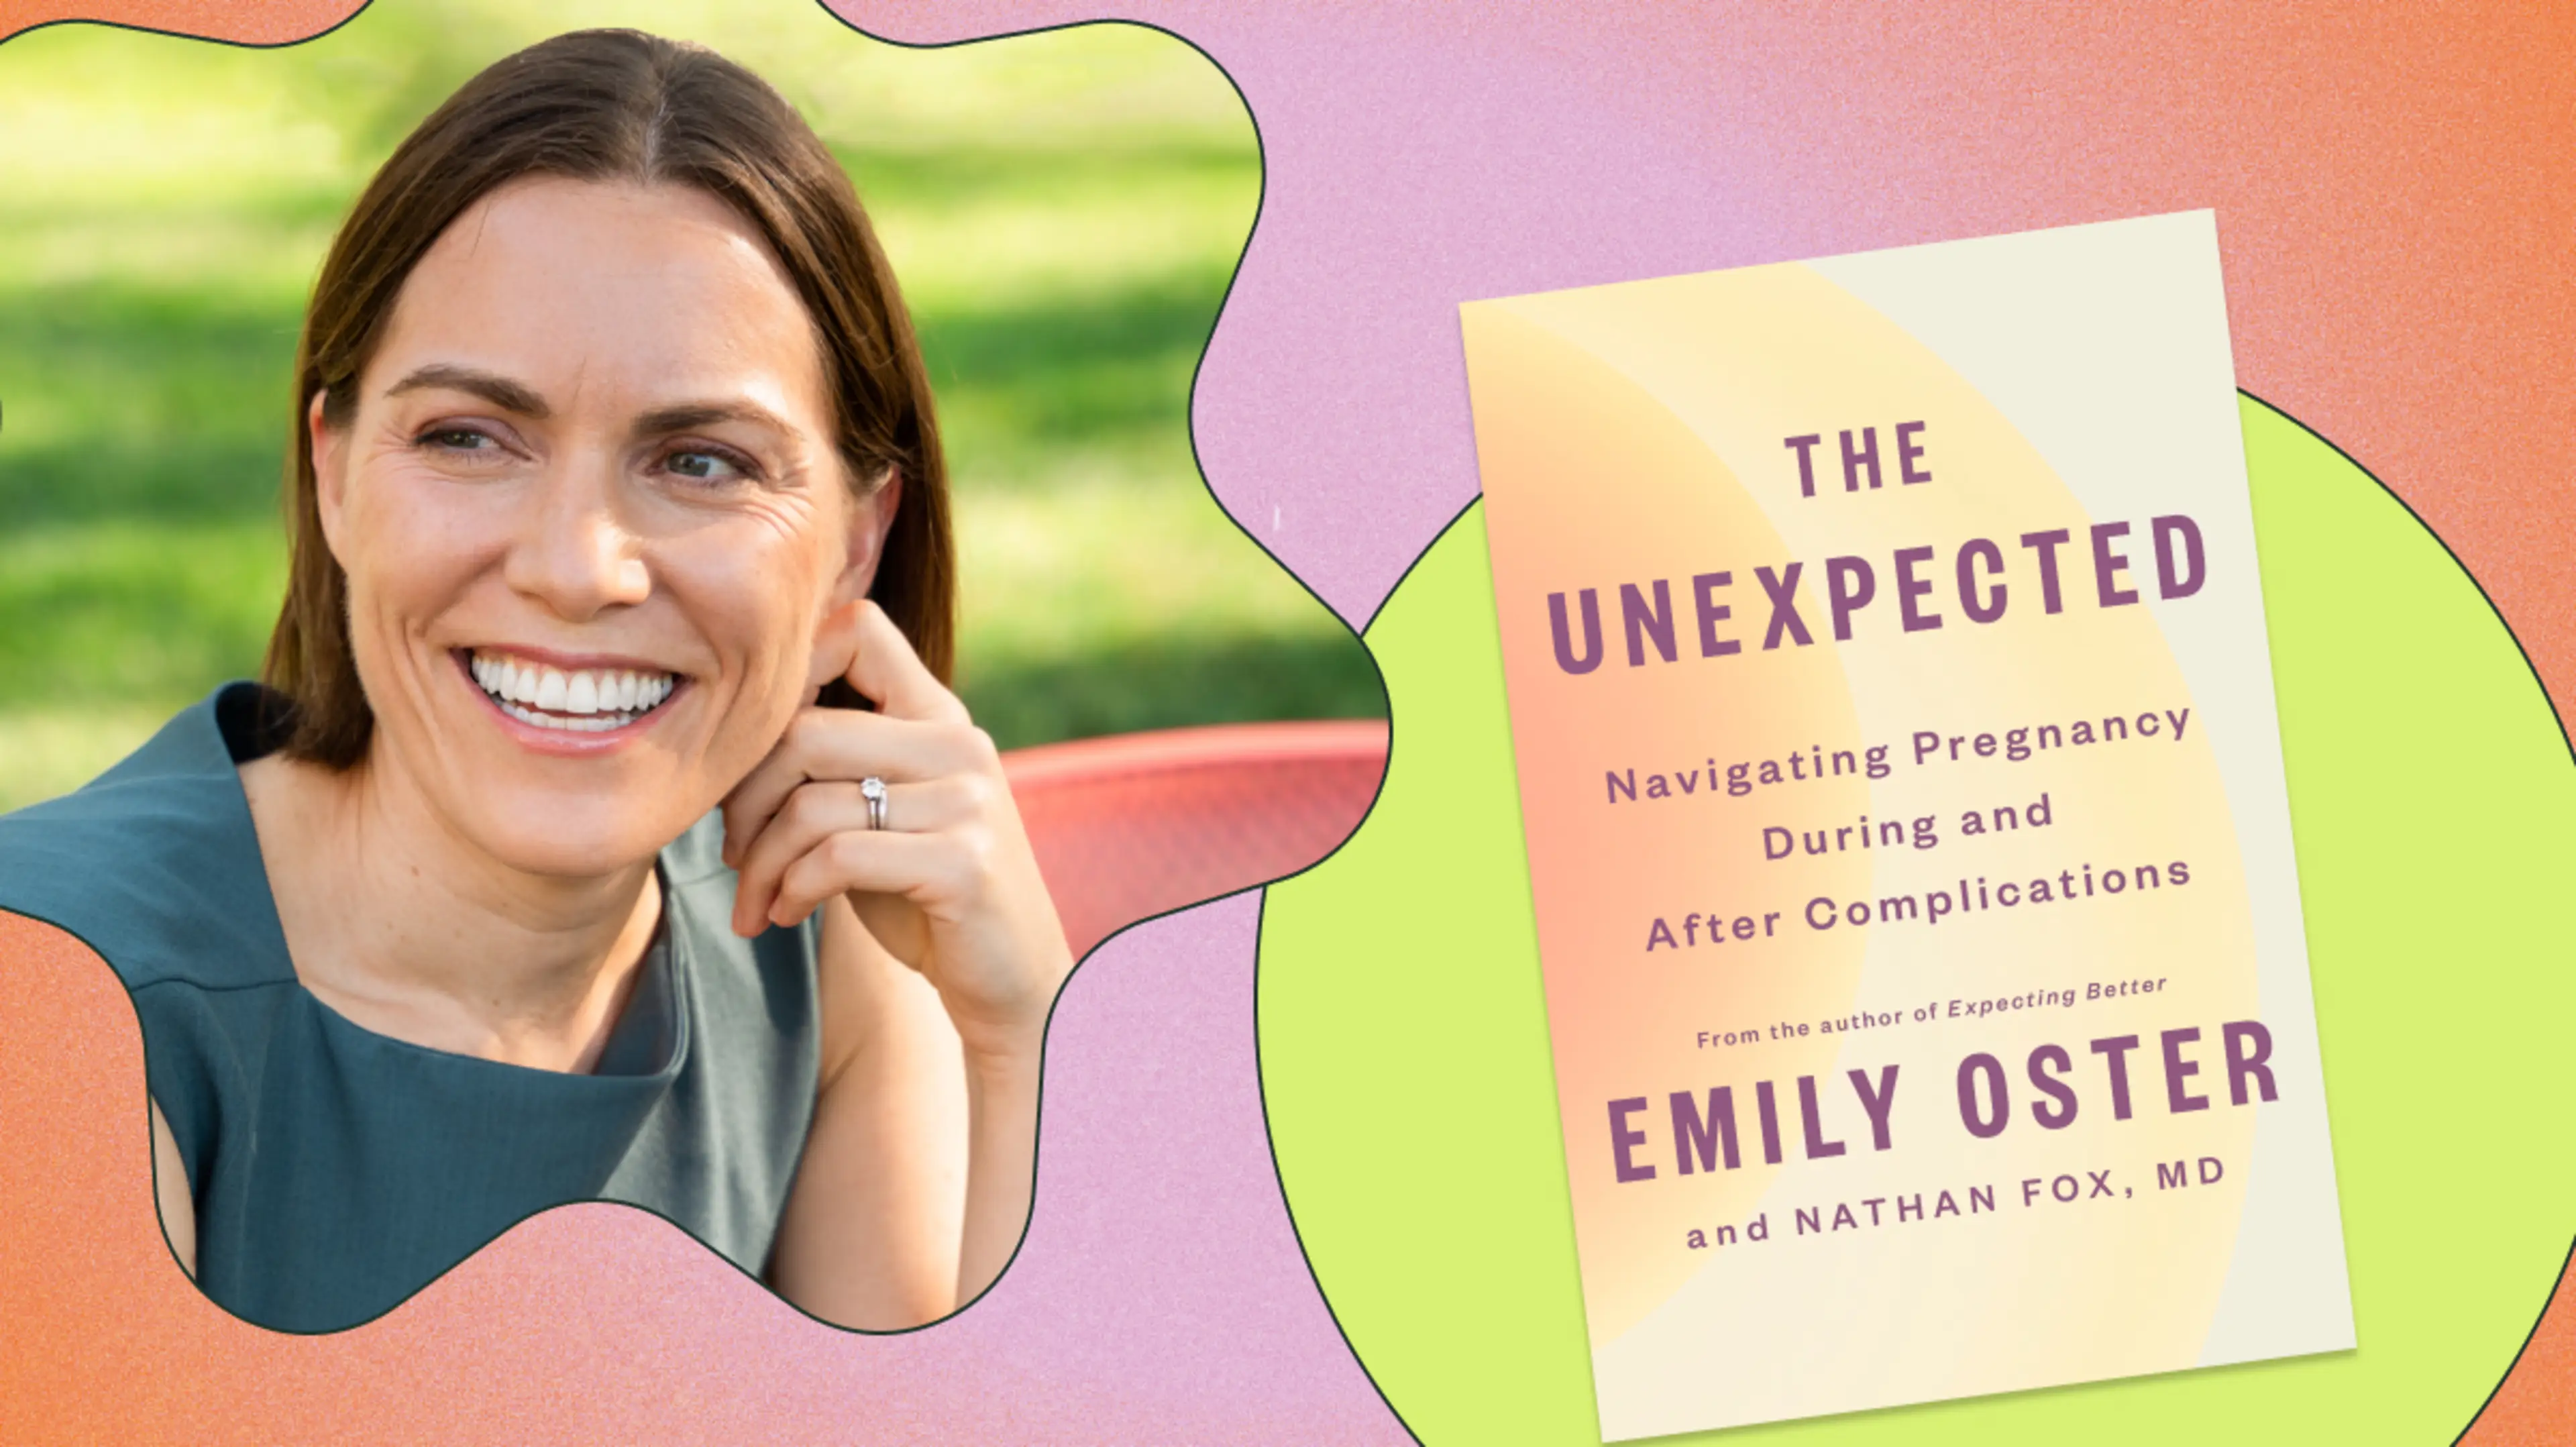 Image for article Emily Oster Shares Her Strategies for Preparing for the Unexpected